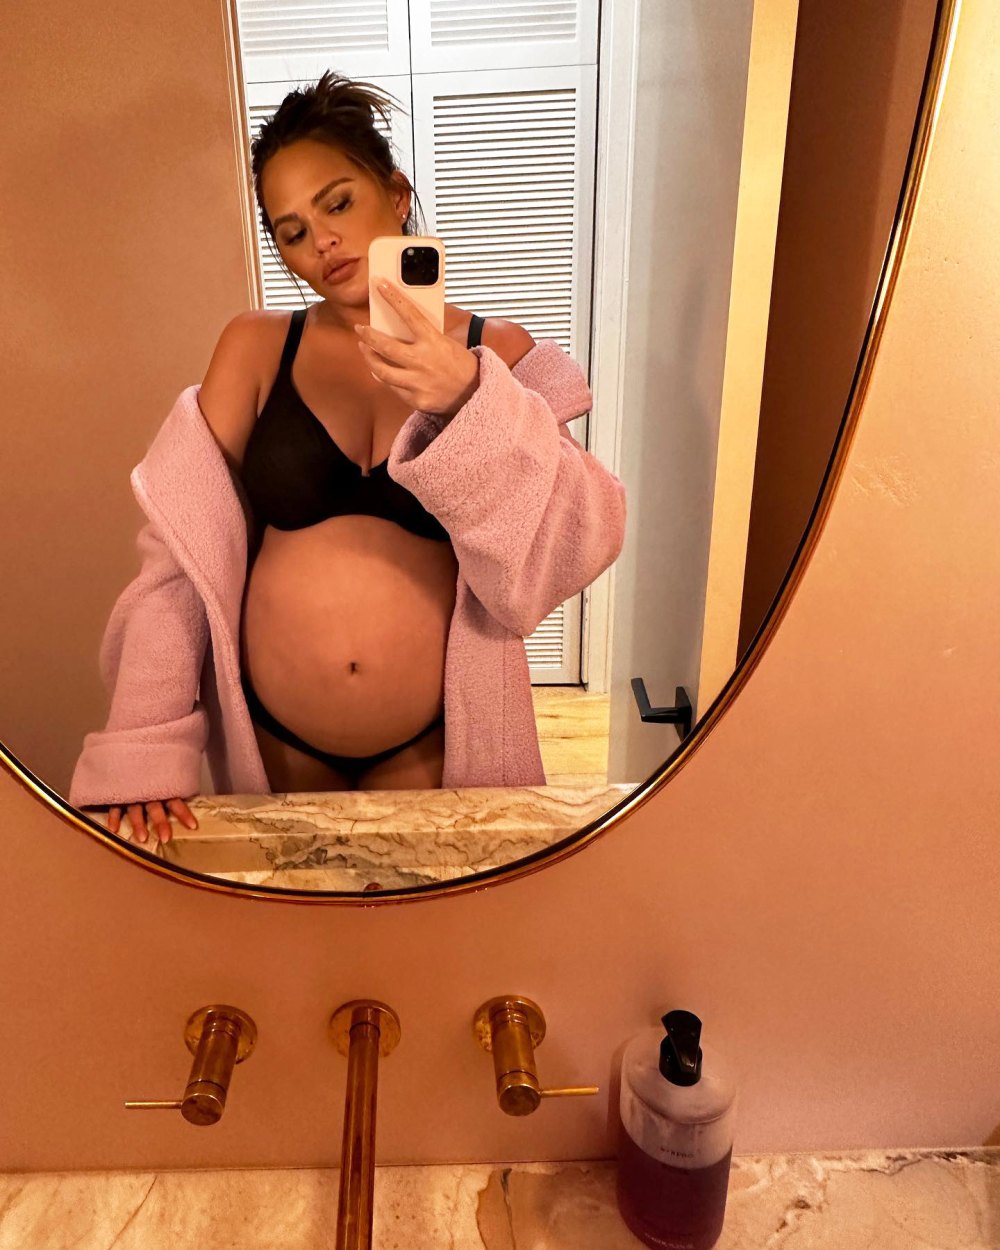 Chrissy Teigen Asks for Advice About Waxing 'Down There' While Pregnant